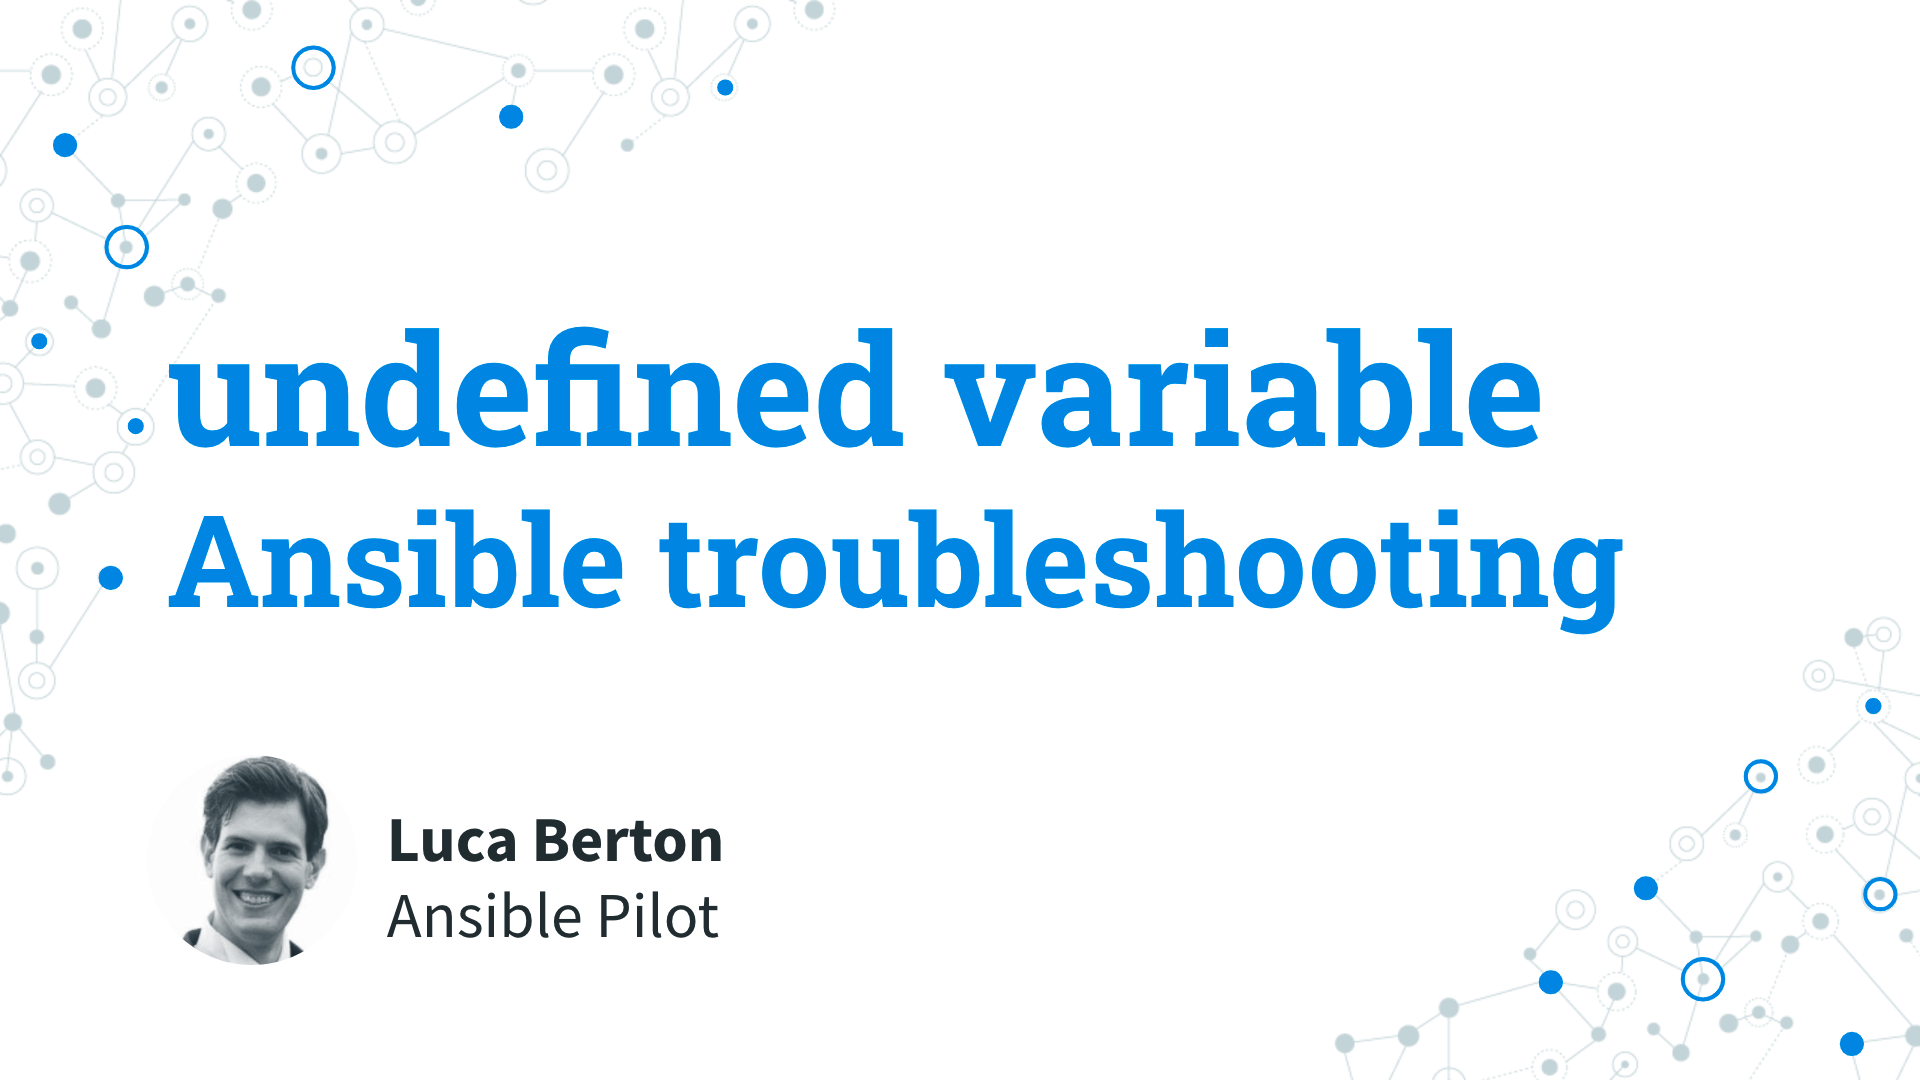 Ansible troubleshooting - undefined variable